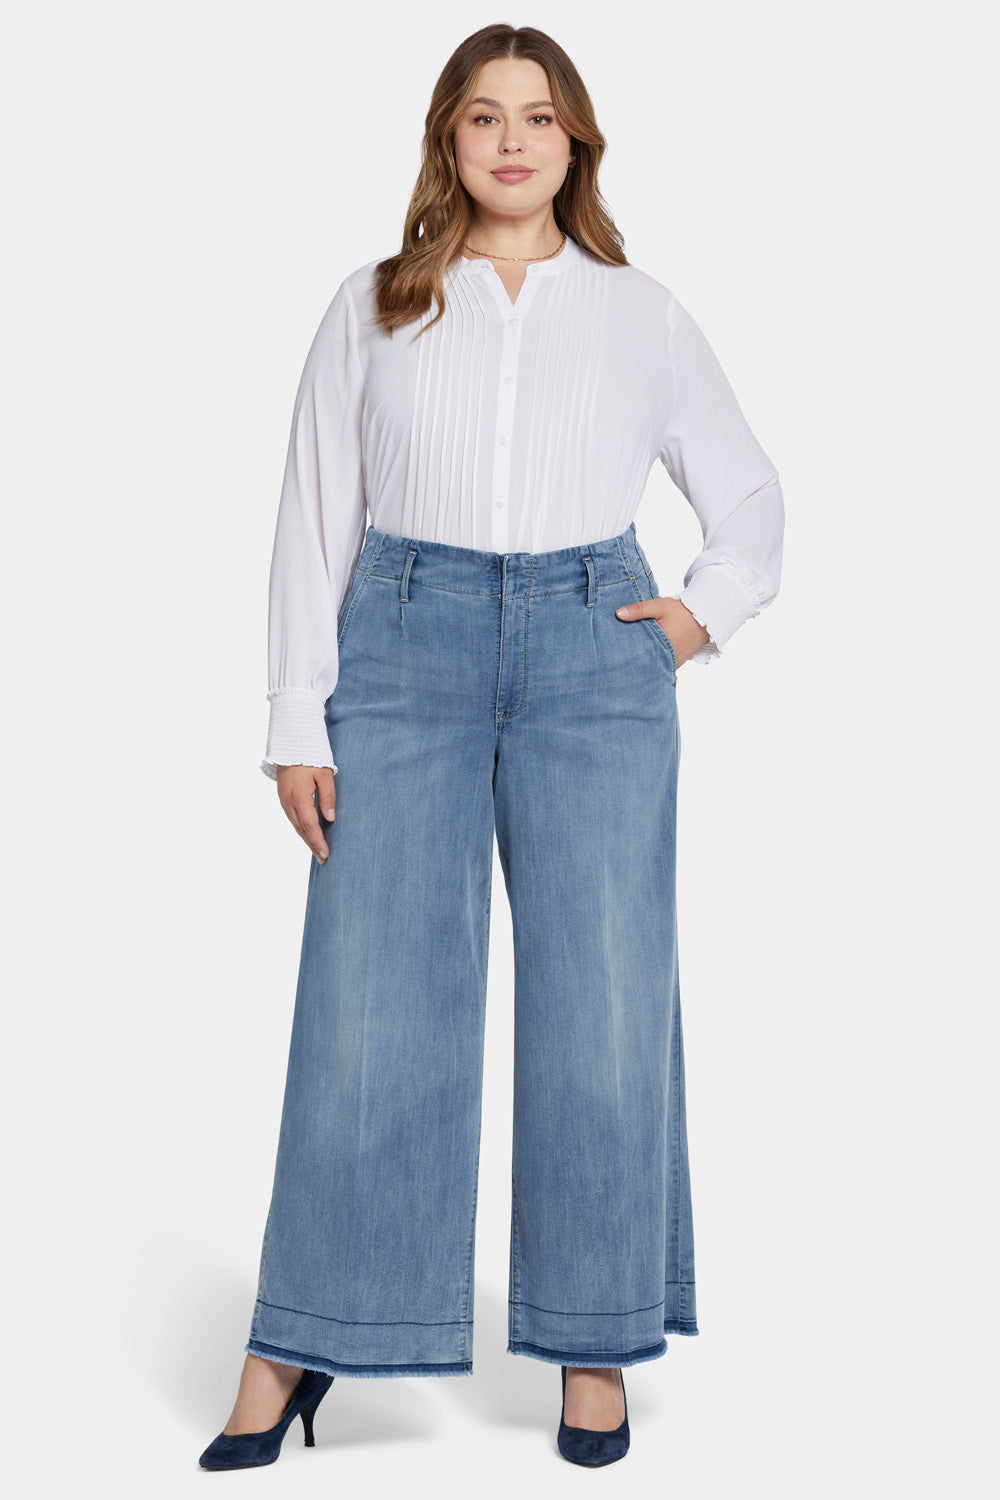 NYDJ Mona Wide Leg Trouser Jeans In Plus Size With High Rise And Frayed Shadow Hems - State